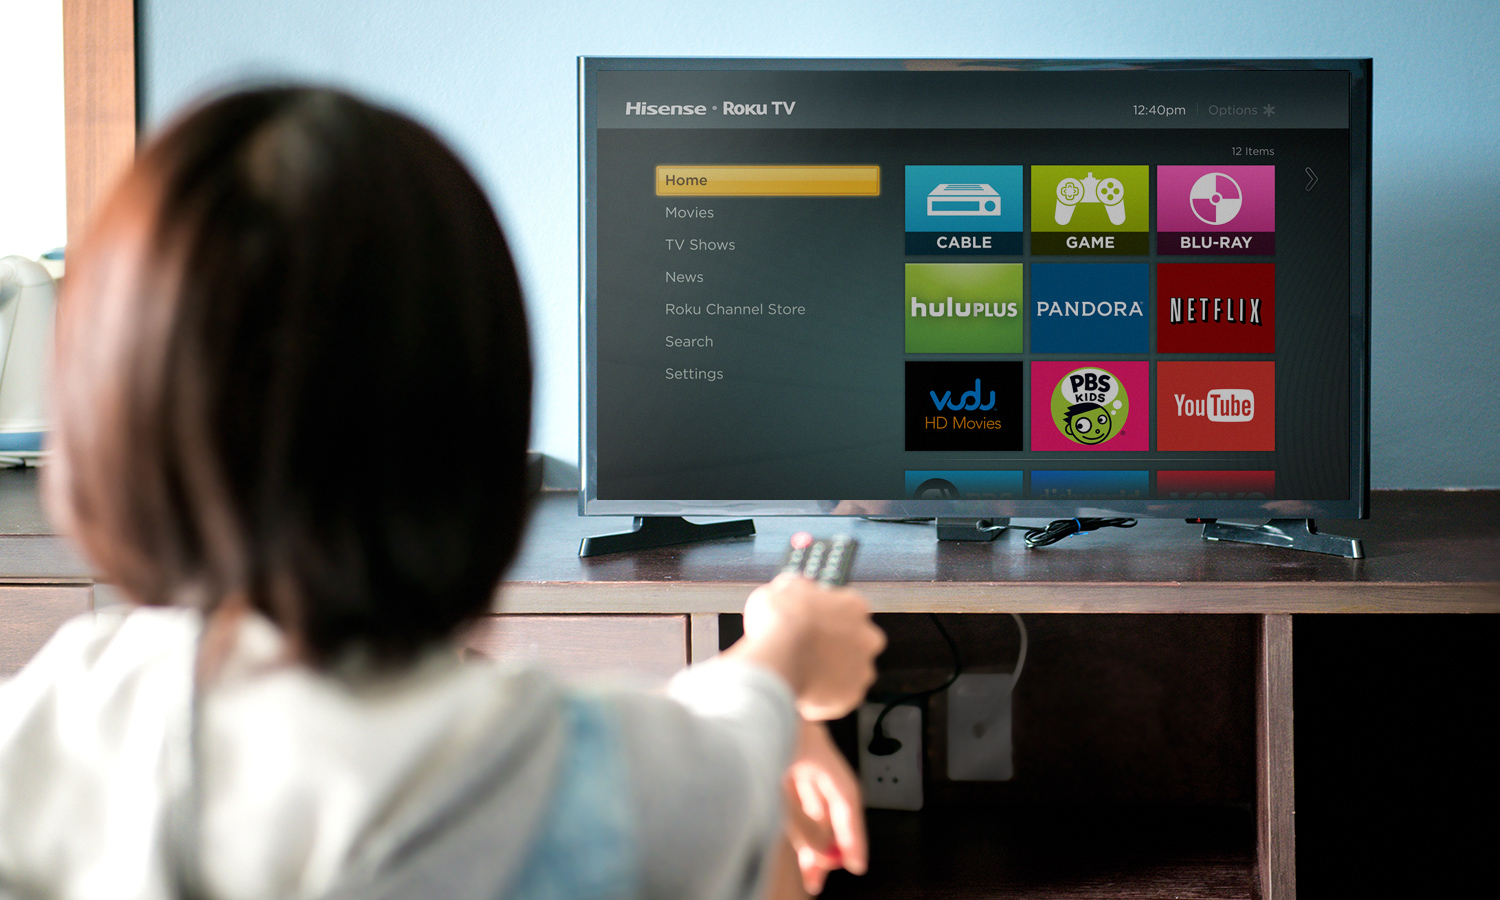  Turn your Normal TV into a Smart TV